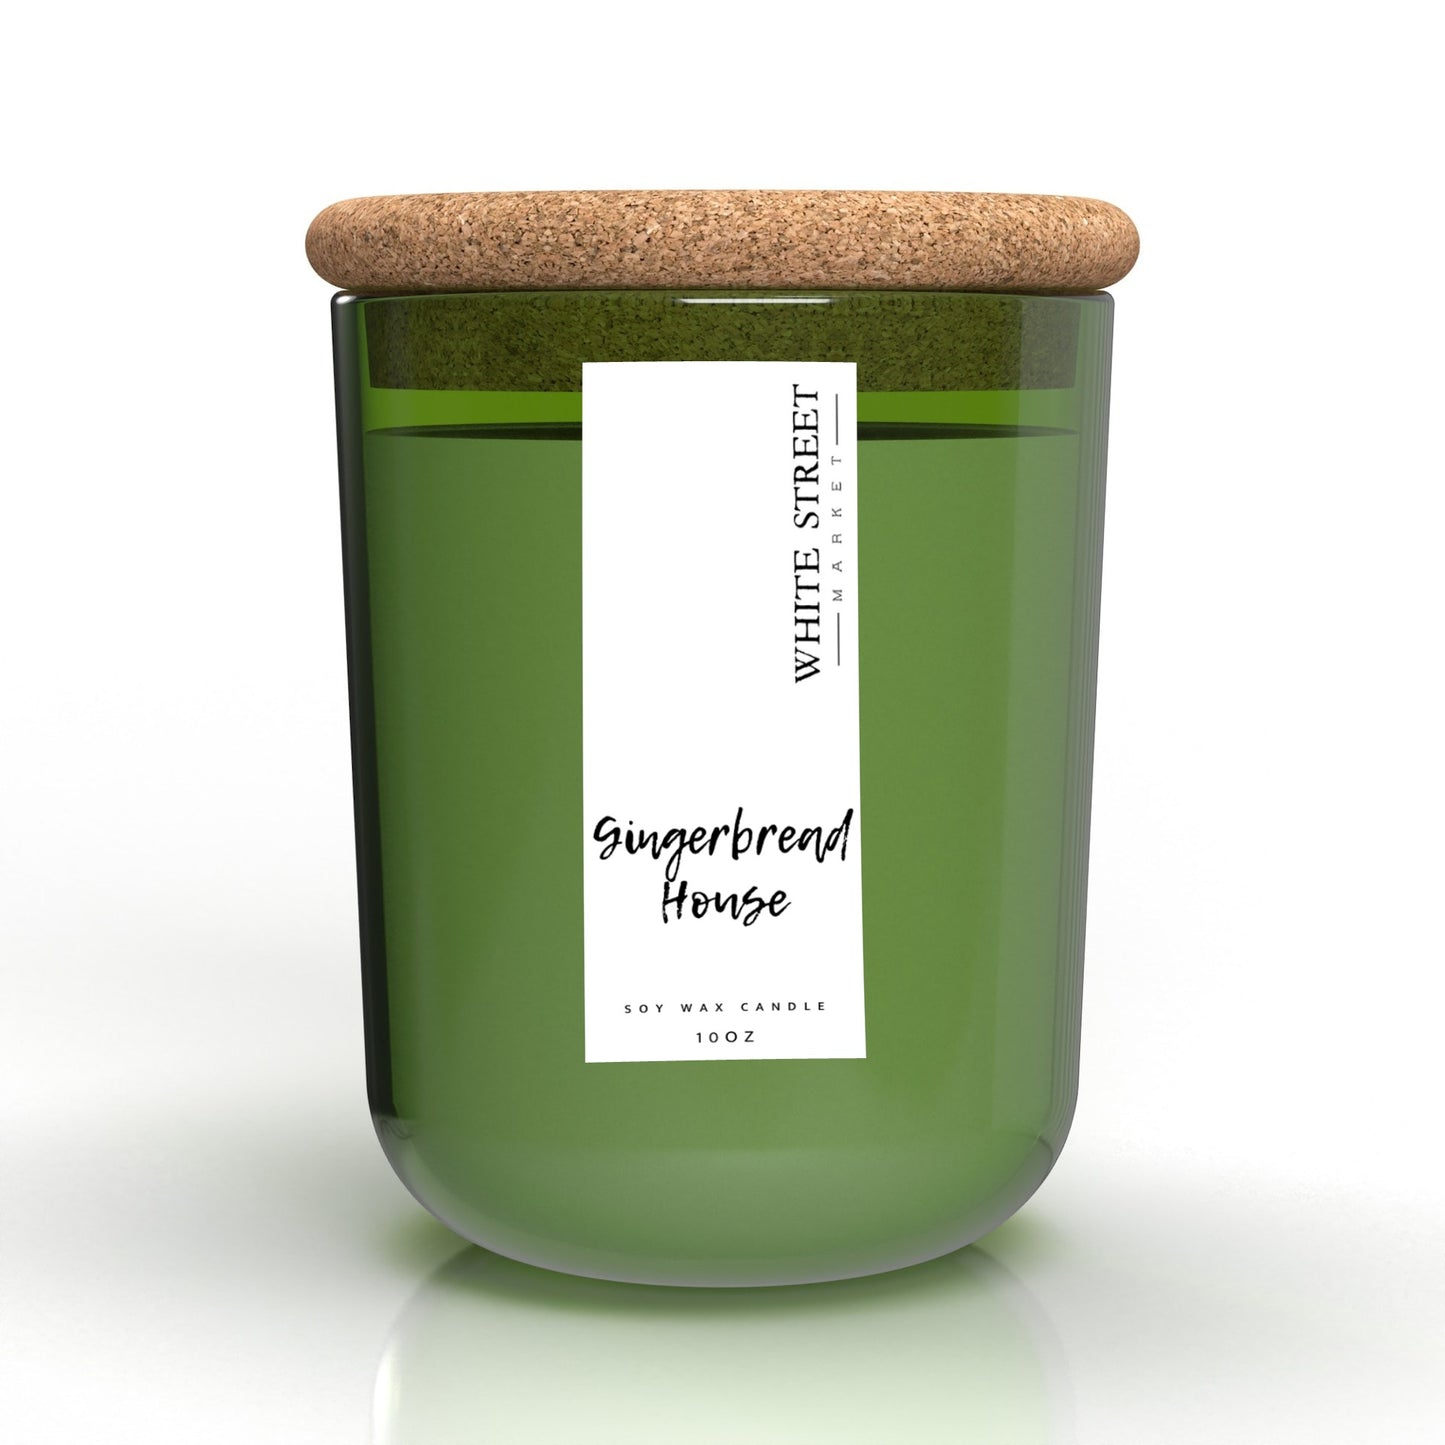 Gingerbread House 10oz Candle - White Street Market